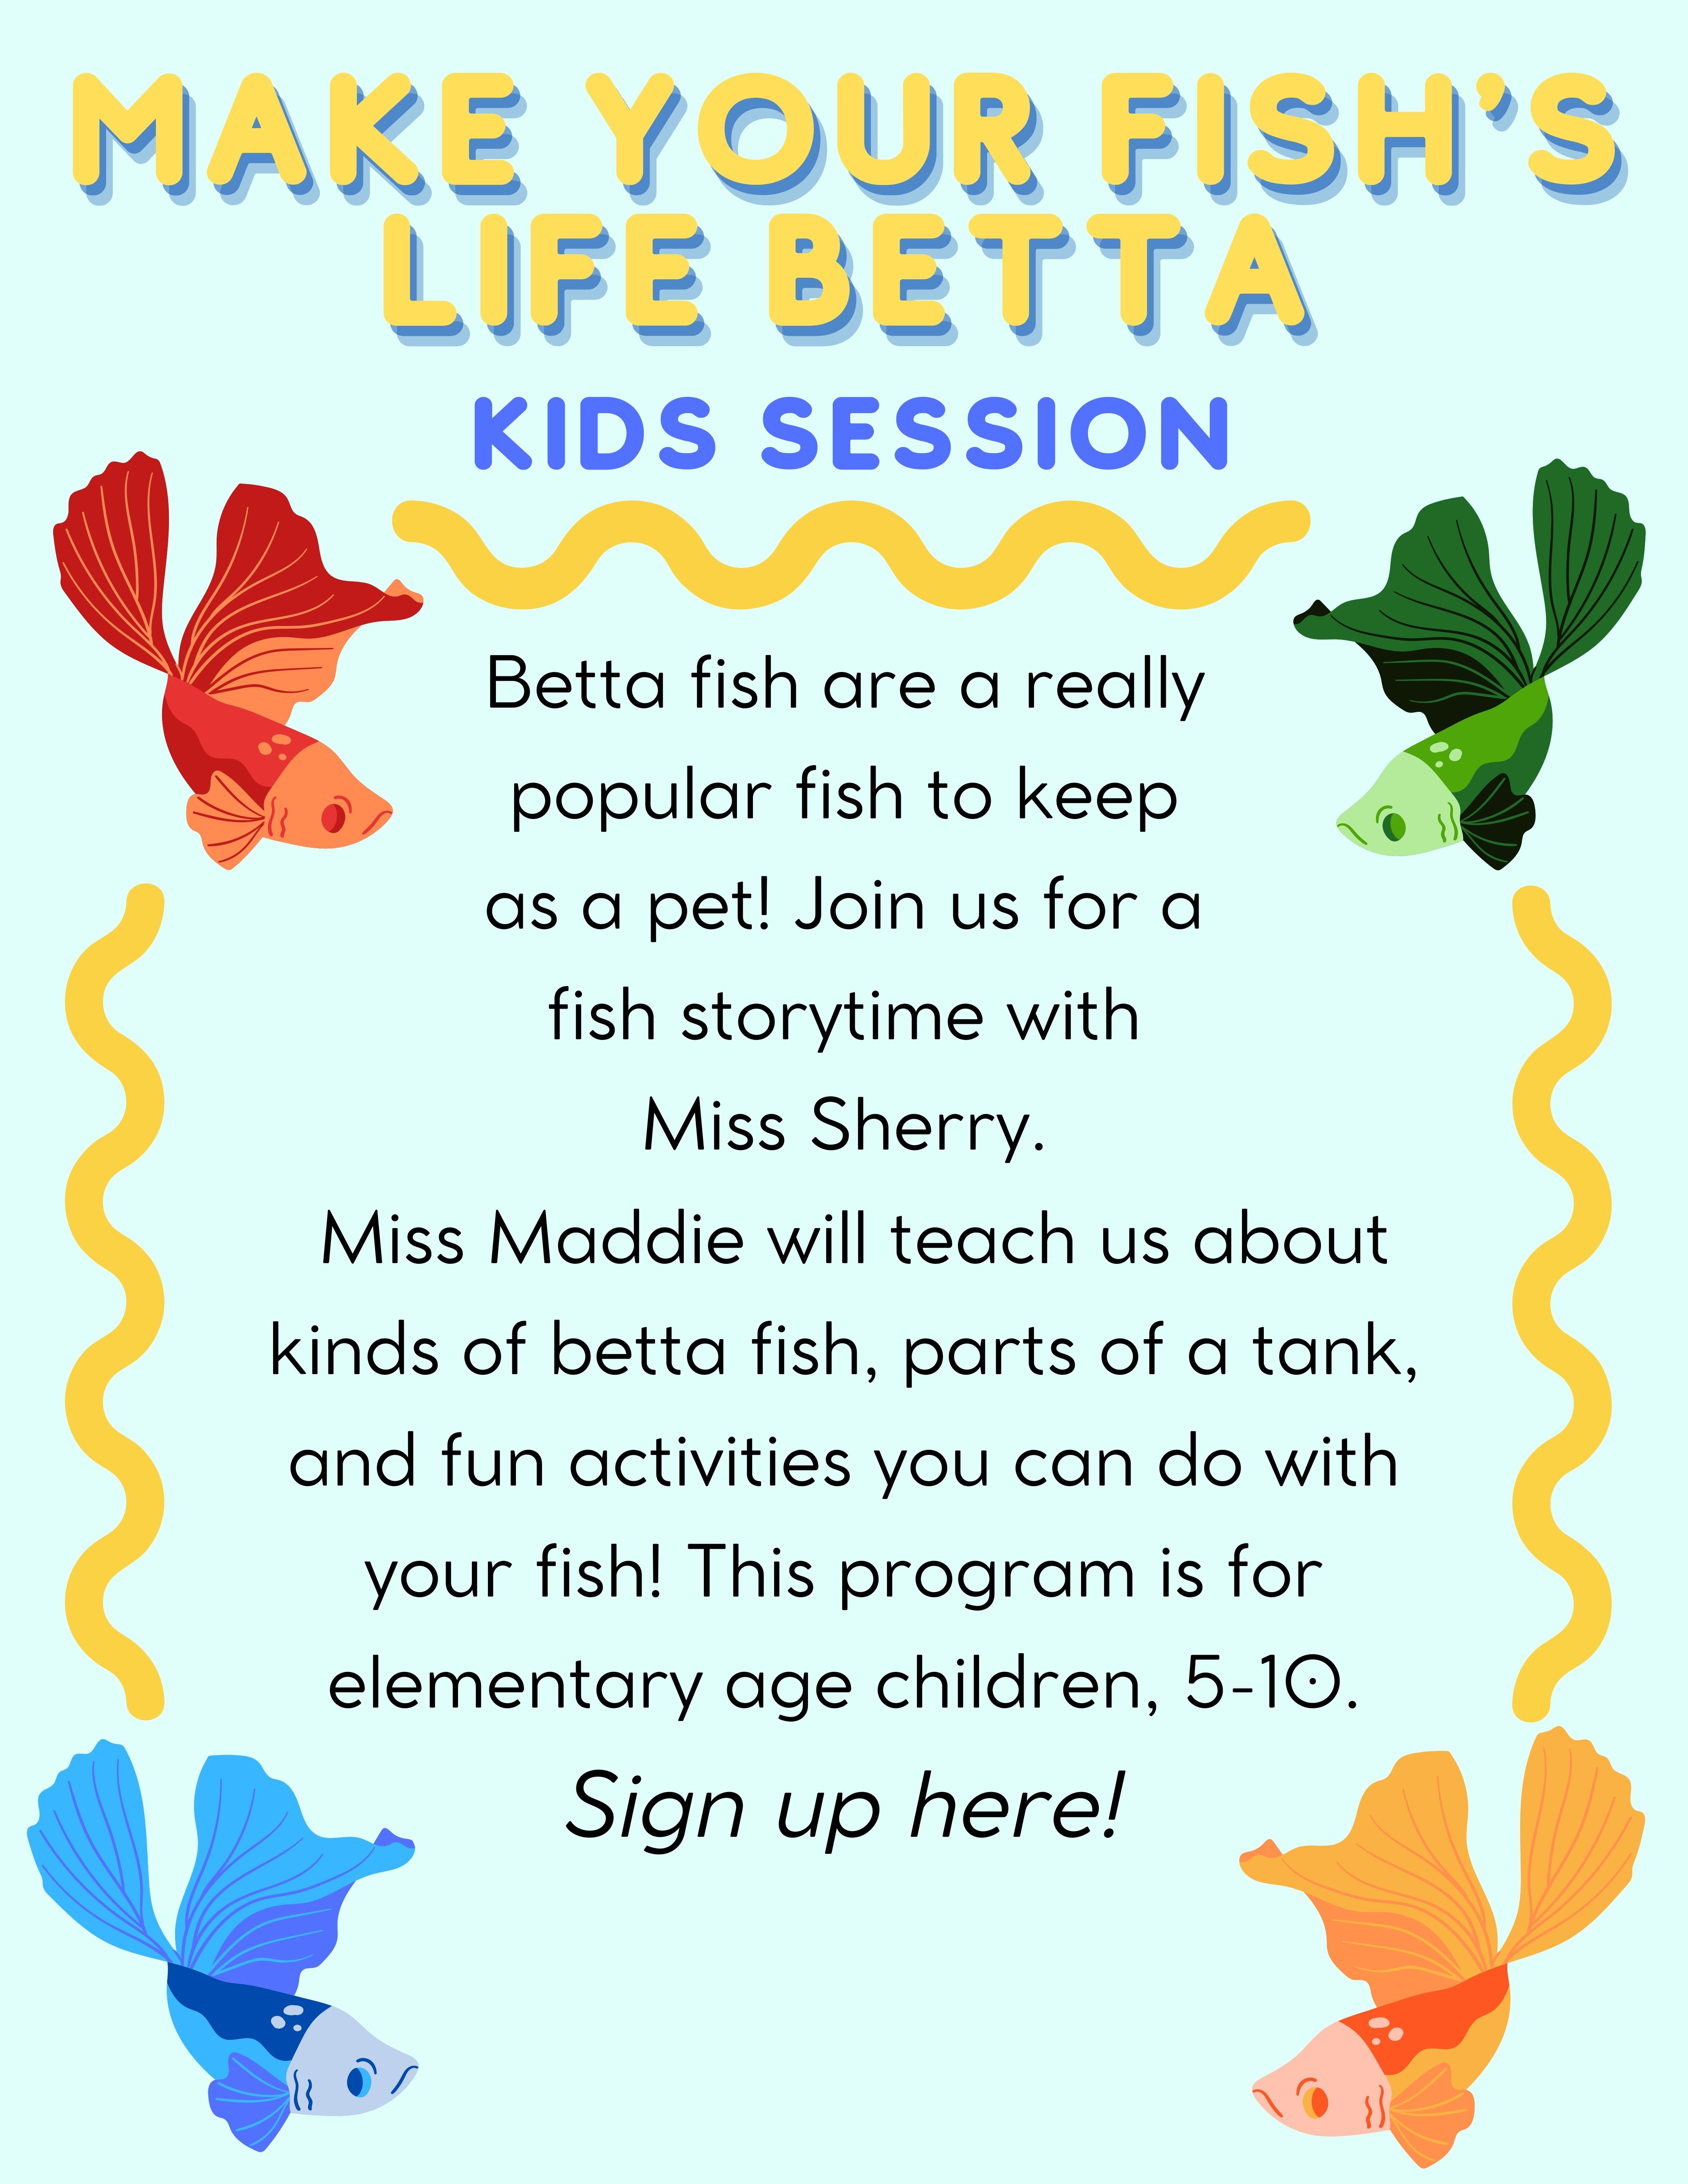 A blue background with four colorful fish. Text reads: "Make Your Fish's Life Betta: Kids Session. Betta fish are a really popular fish to keep as a pet! Join us for a fish storytime with Miss Sherry. Miss Maddie will teach us about kinds of betta fish, parts of a tank, and fun activities you can do with your fish!  This program is for elementary age children."